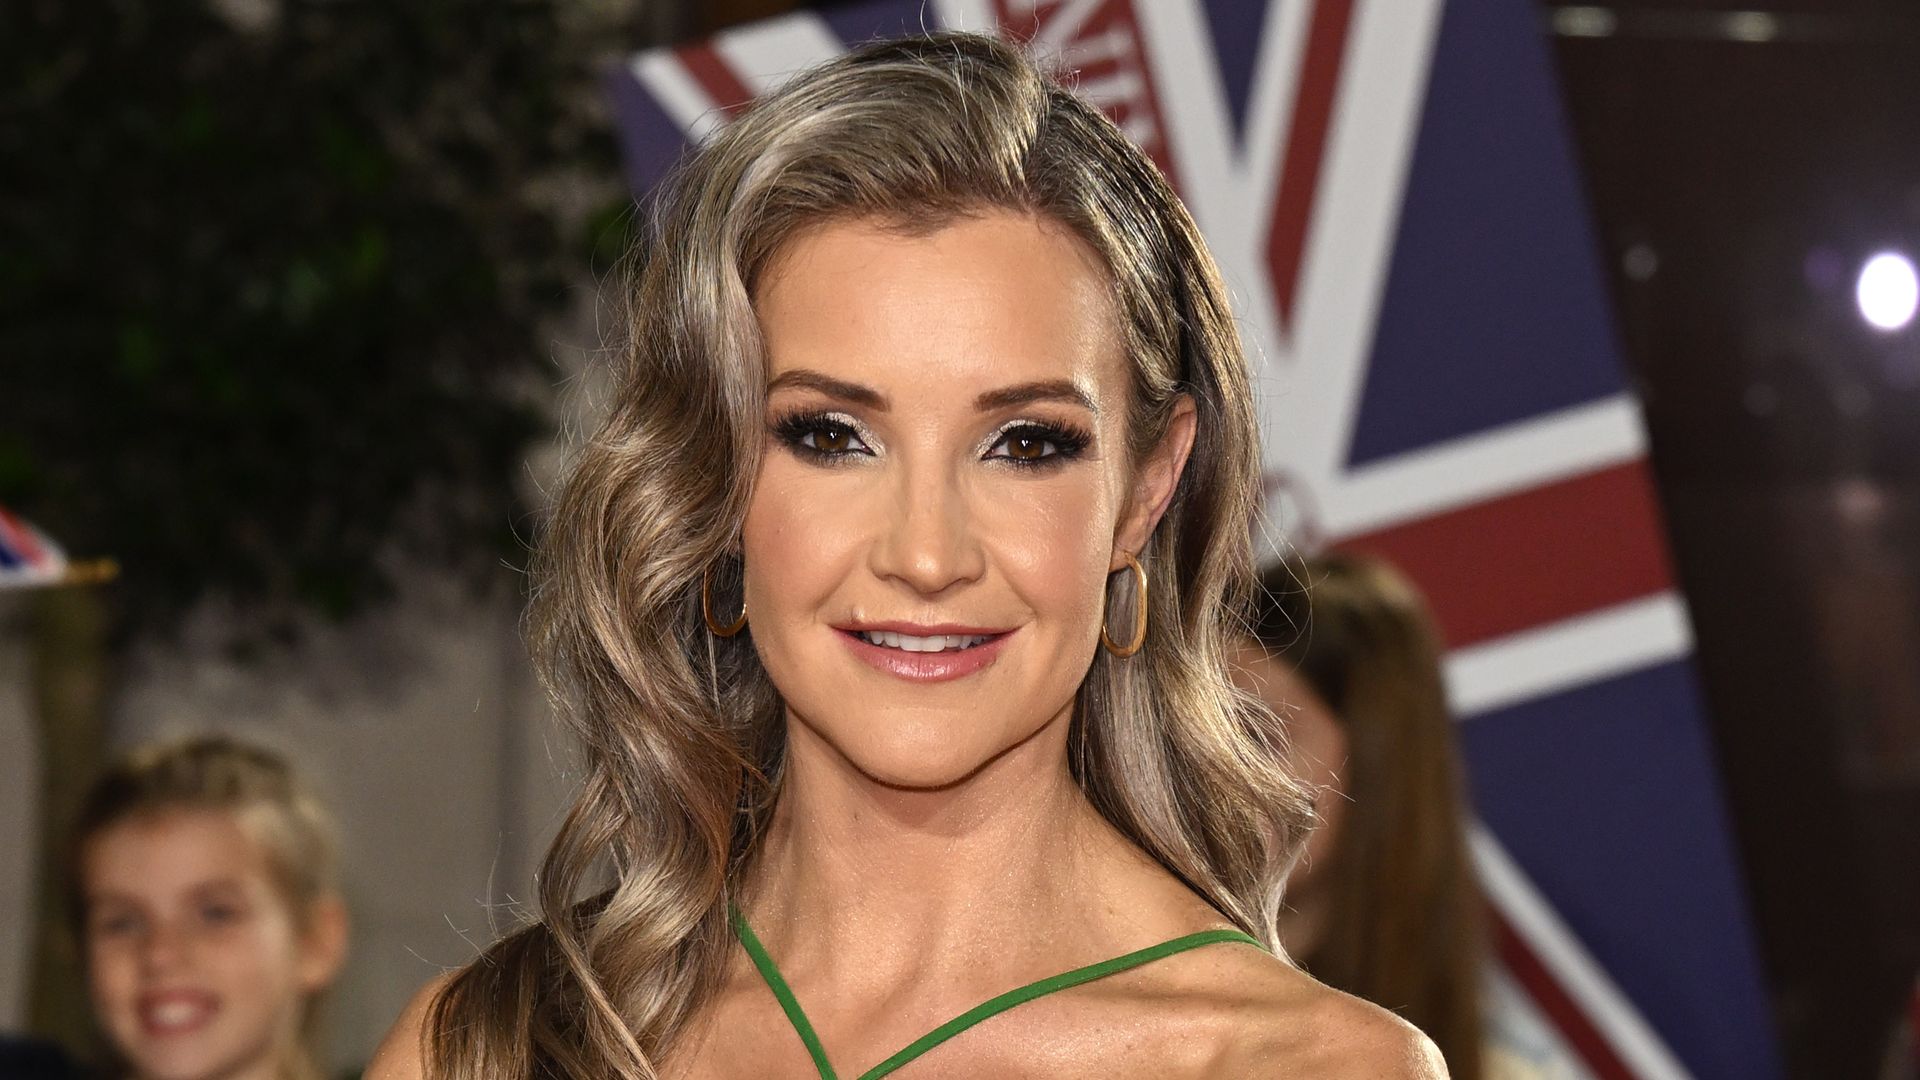 Helen Skelton attends the Pride of Britain Awards 2022 at Grosvenor House 